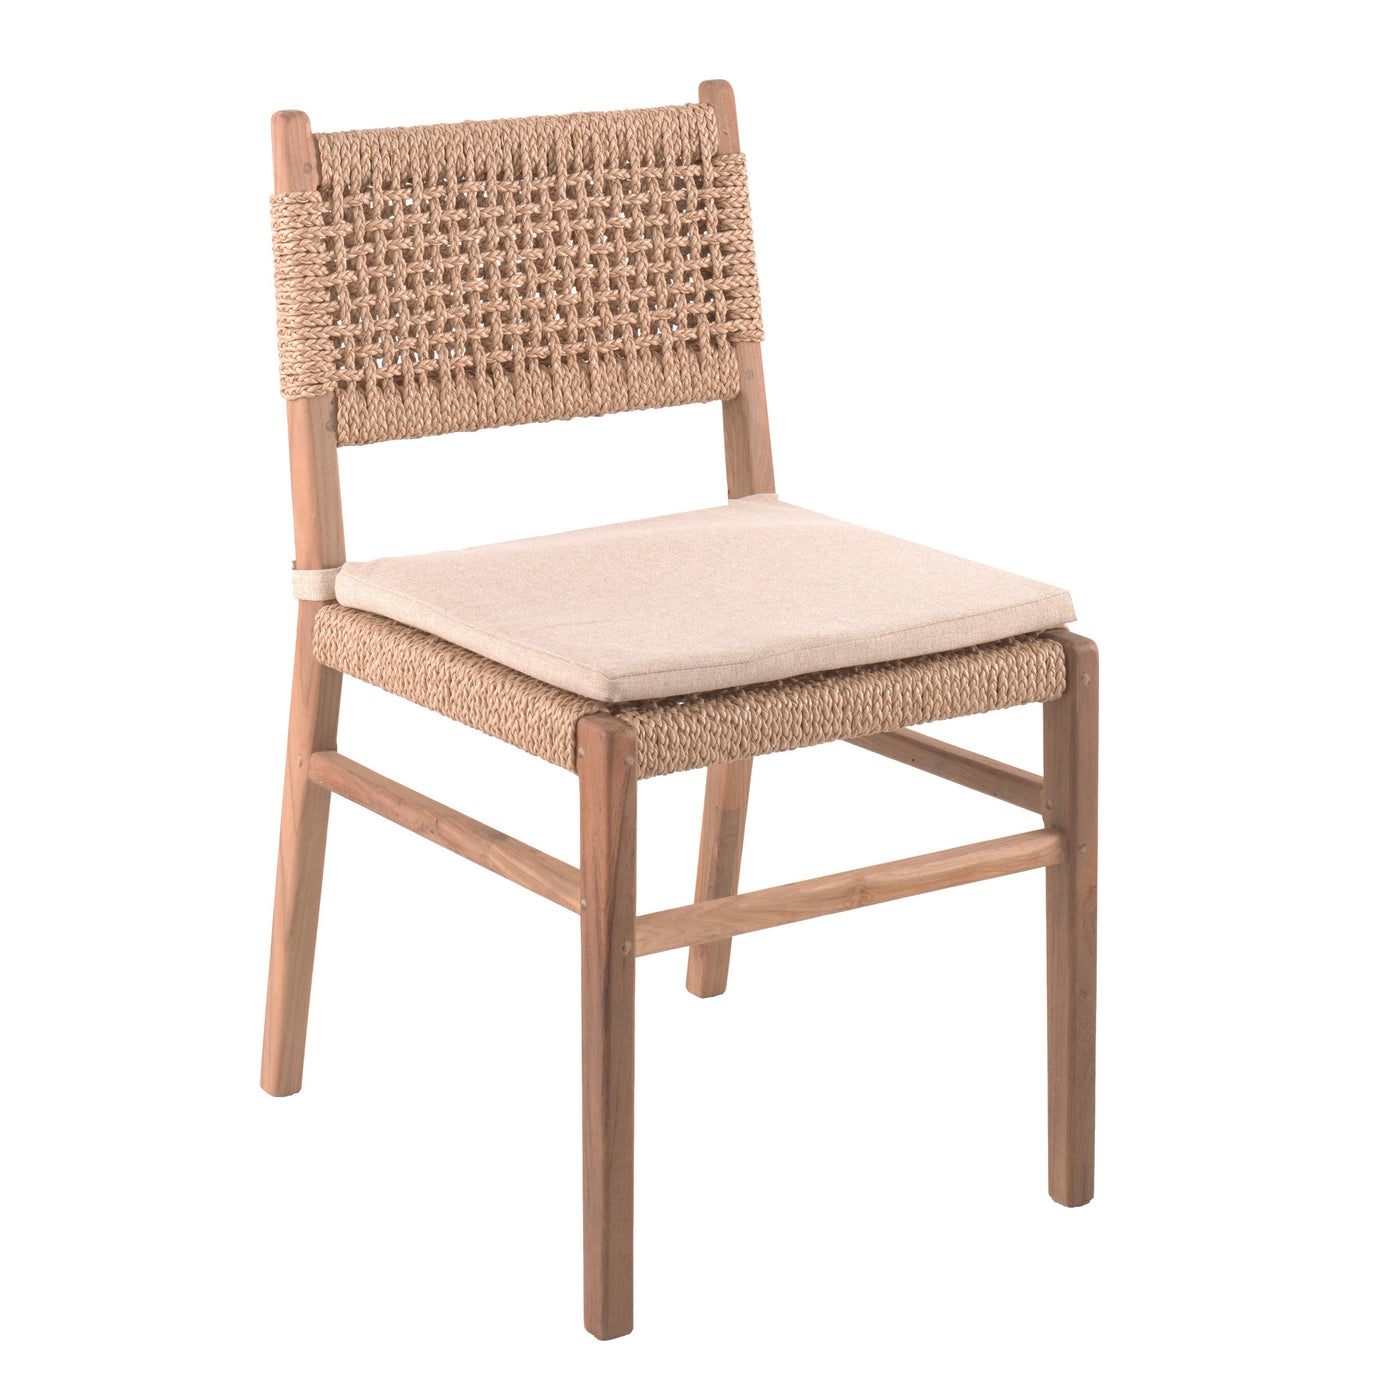 Menorca Recycled Teak Side Chair with Rope & Cushion